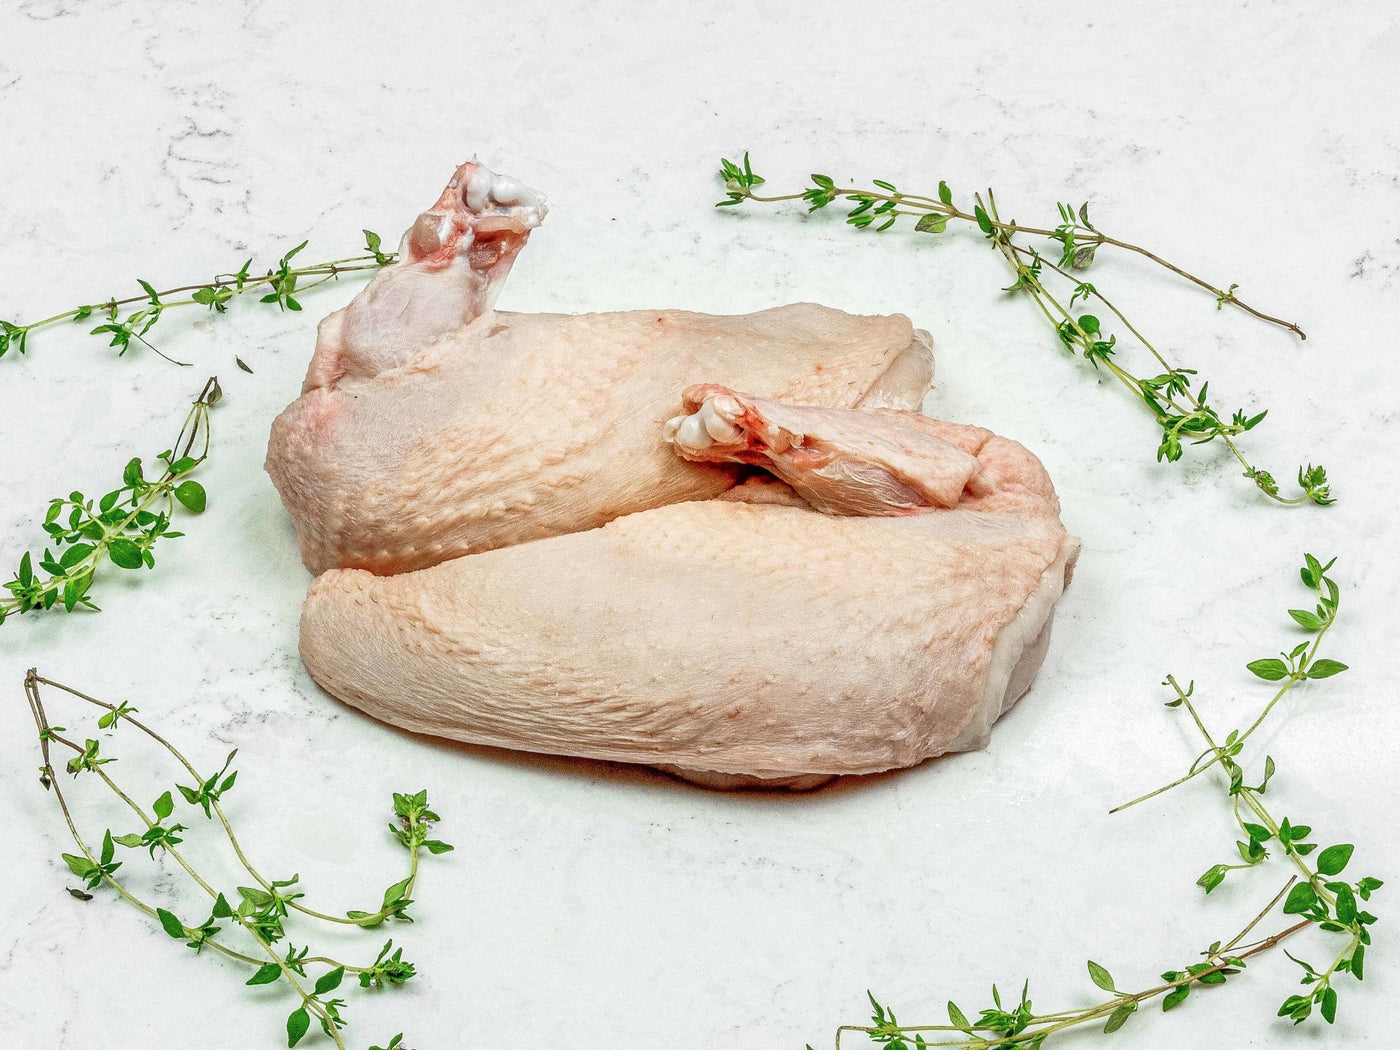 Free Range Herb Fed Chicken Supremes - Chicken - Thomas Joseph Butchery - Ethical Dry-Aged Meat The Best Steak UK Thomas Joseph Butchery